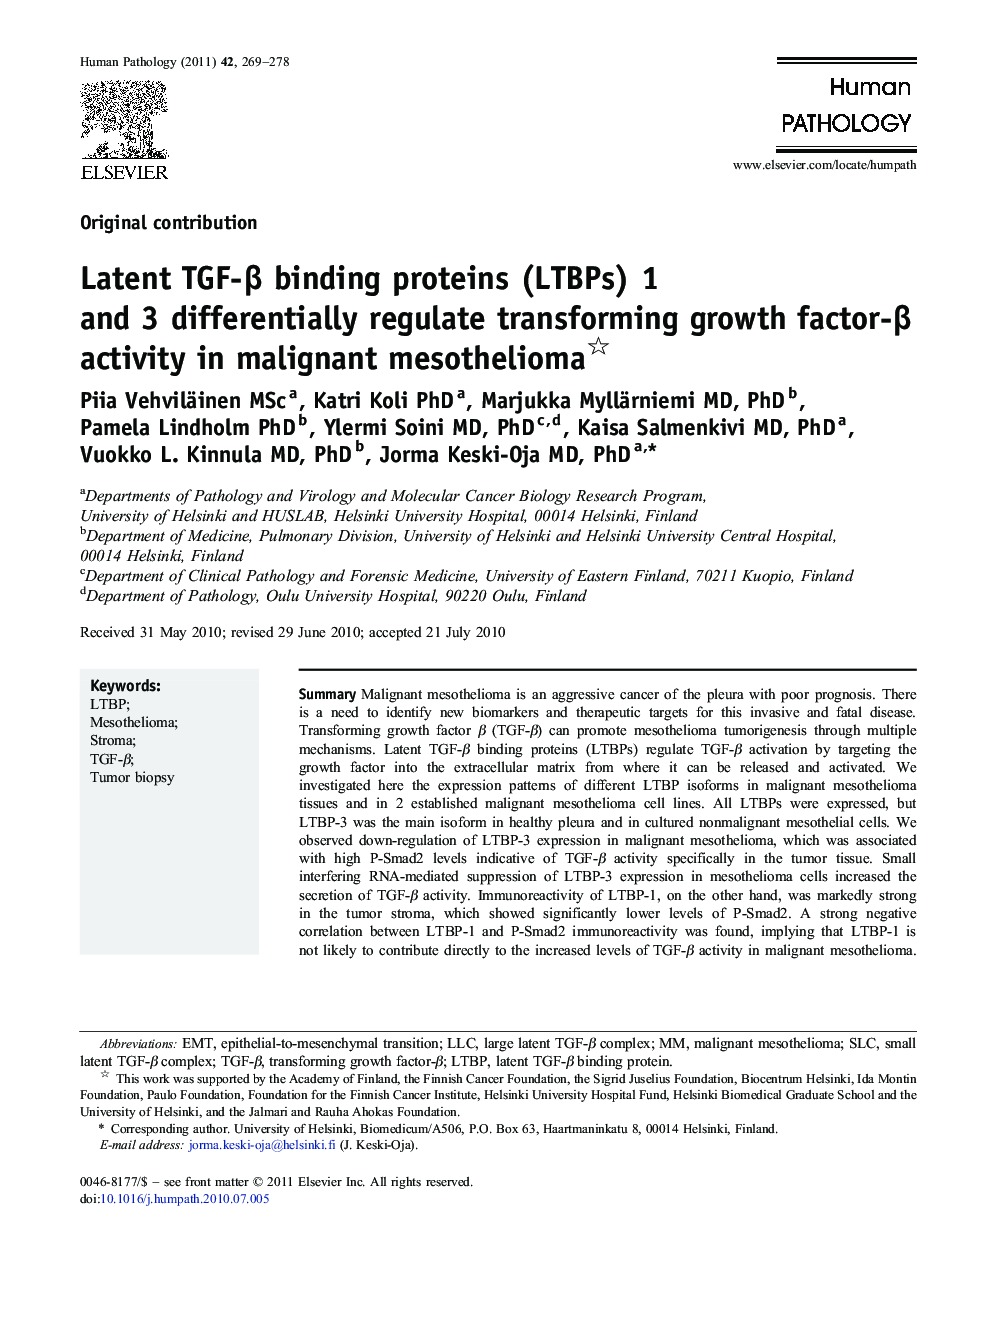 Latent TGF-β binding proteins (LTBPs) 1 and 3 differentially regulate transforming growth factor-β activity in malignant mesothelioma 